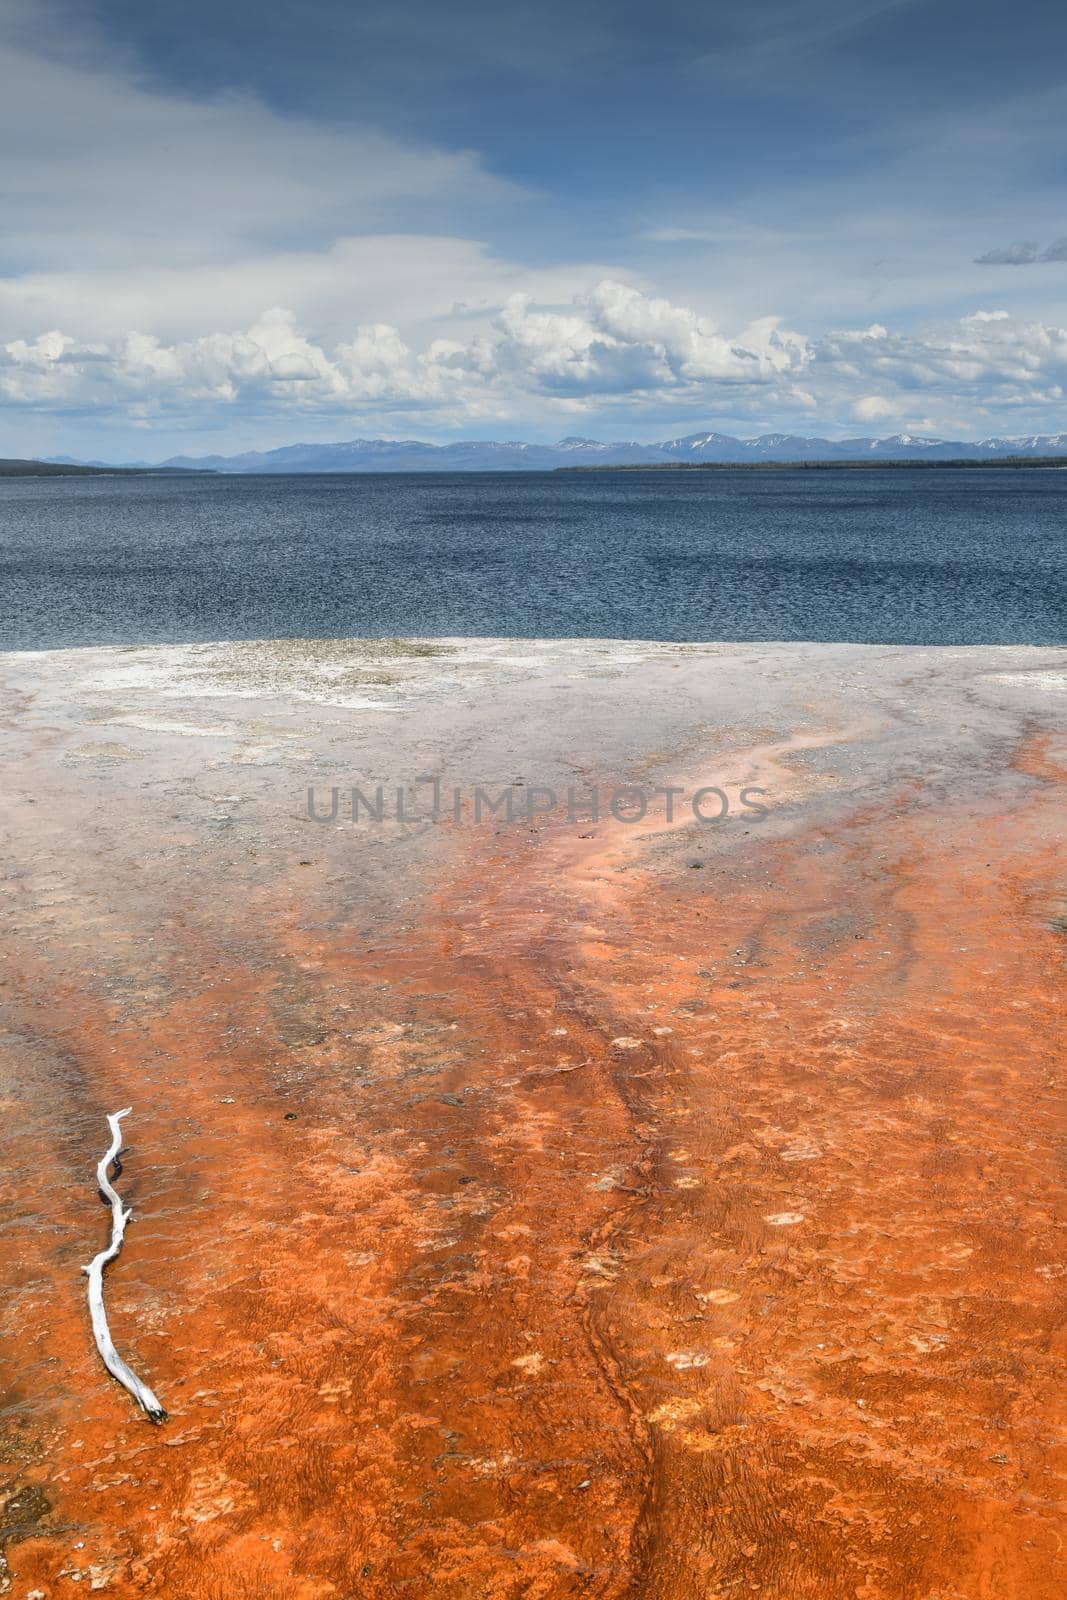 Yellowstone geothermal meets the Lake